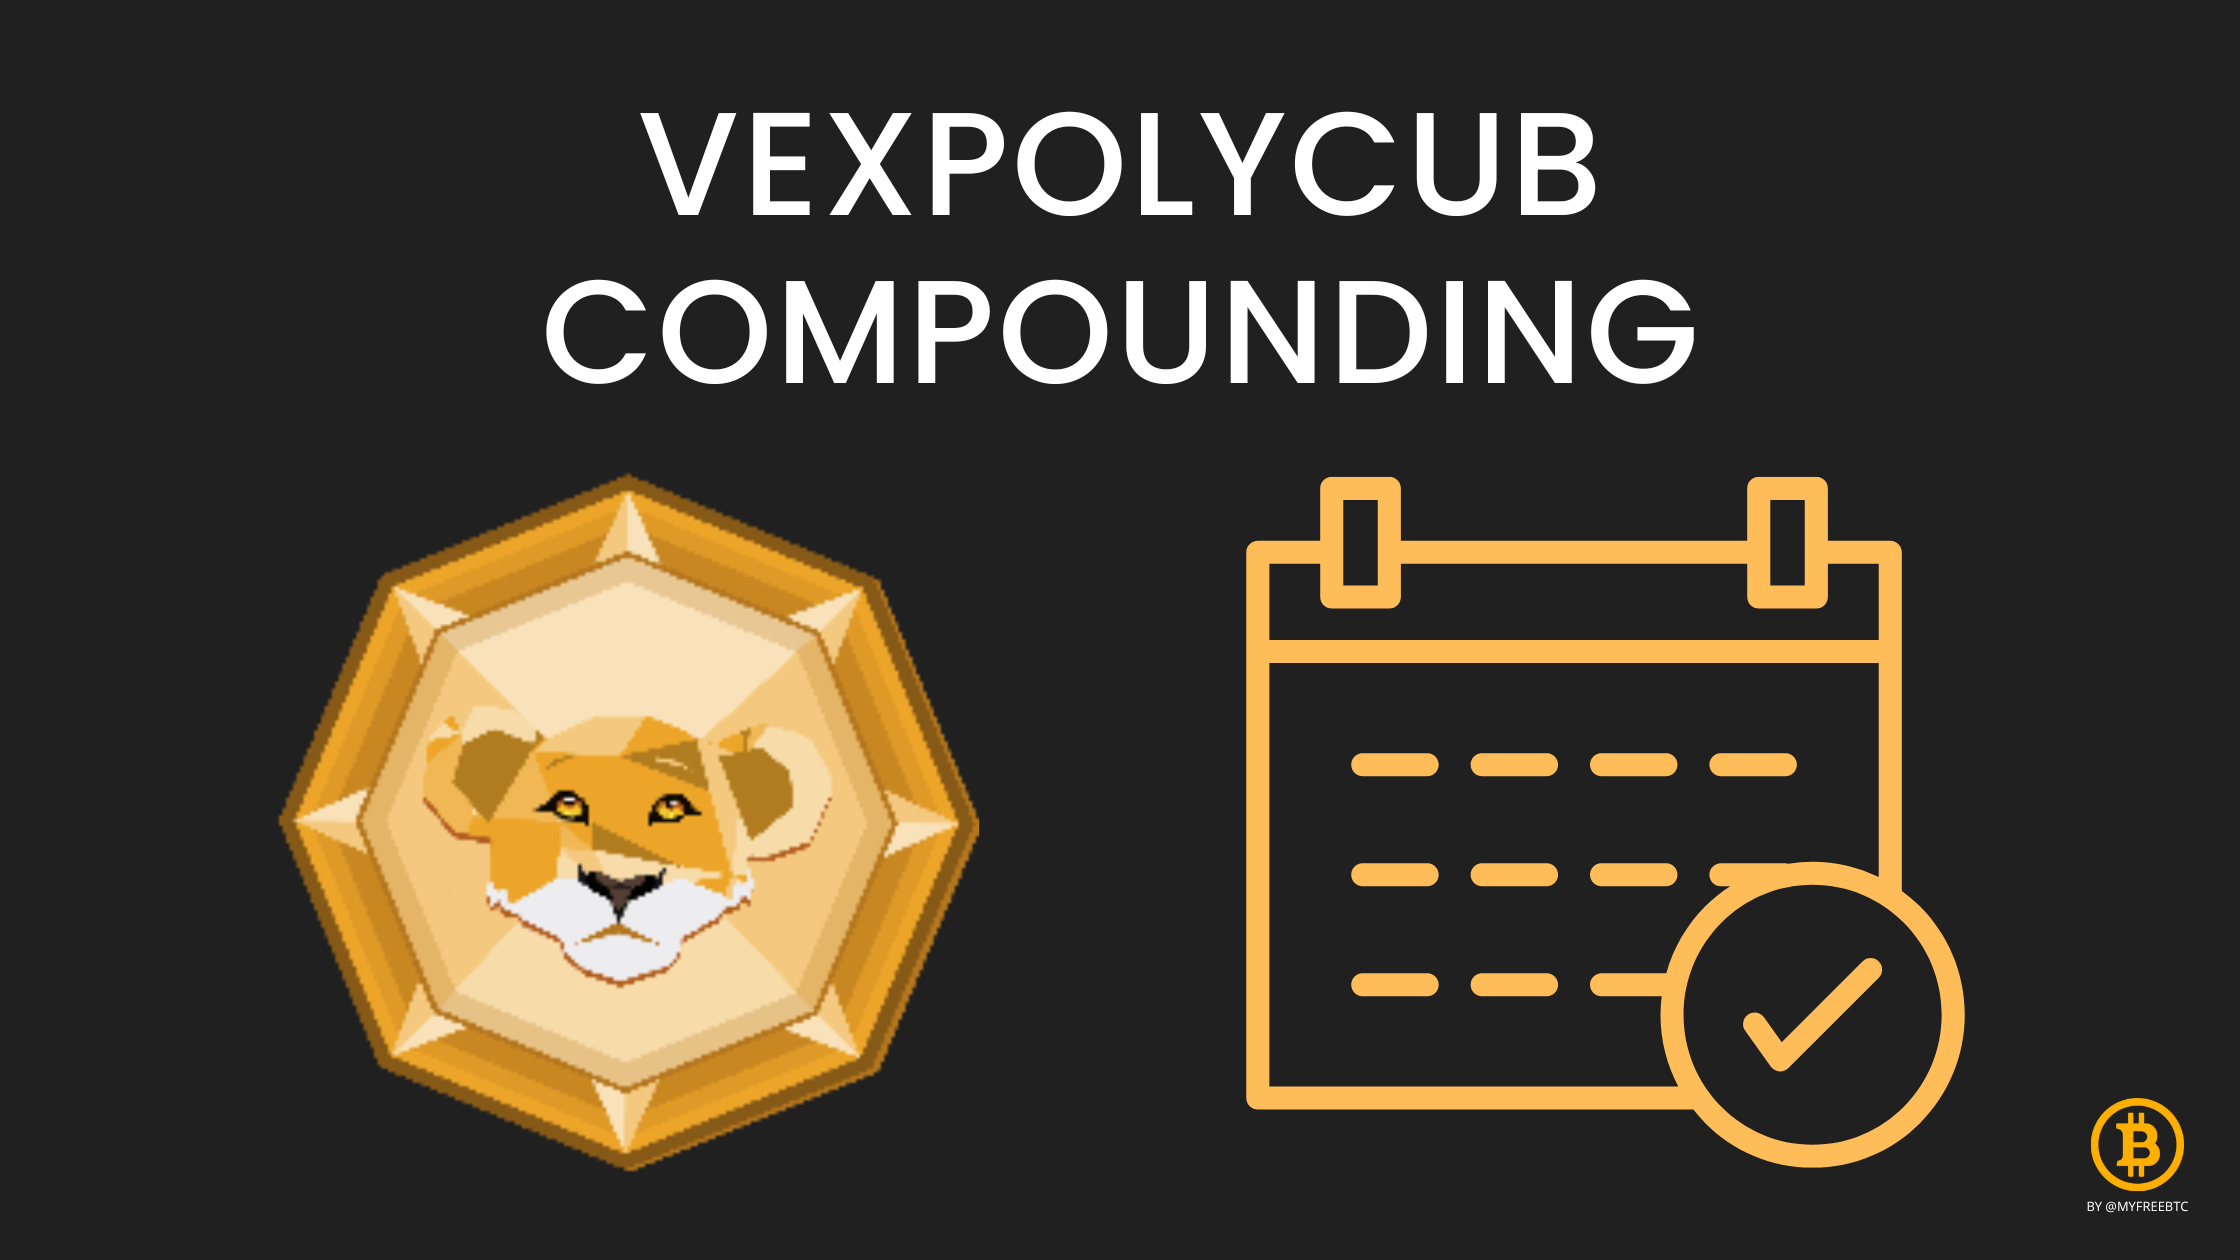 @myfreebtc/vexpolycub-should-compound-on-the-15th-of-every-month